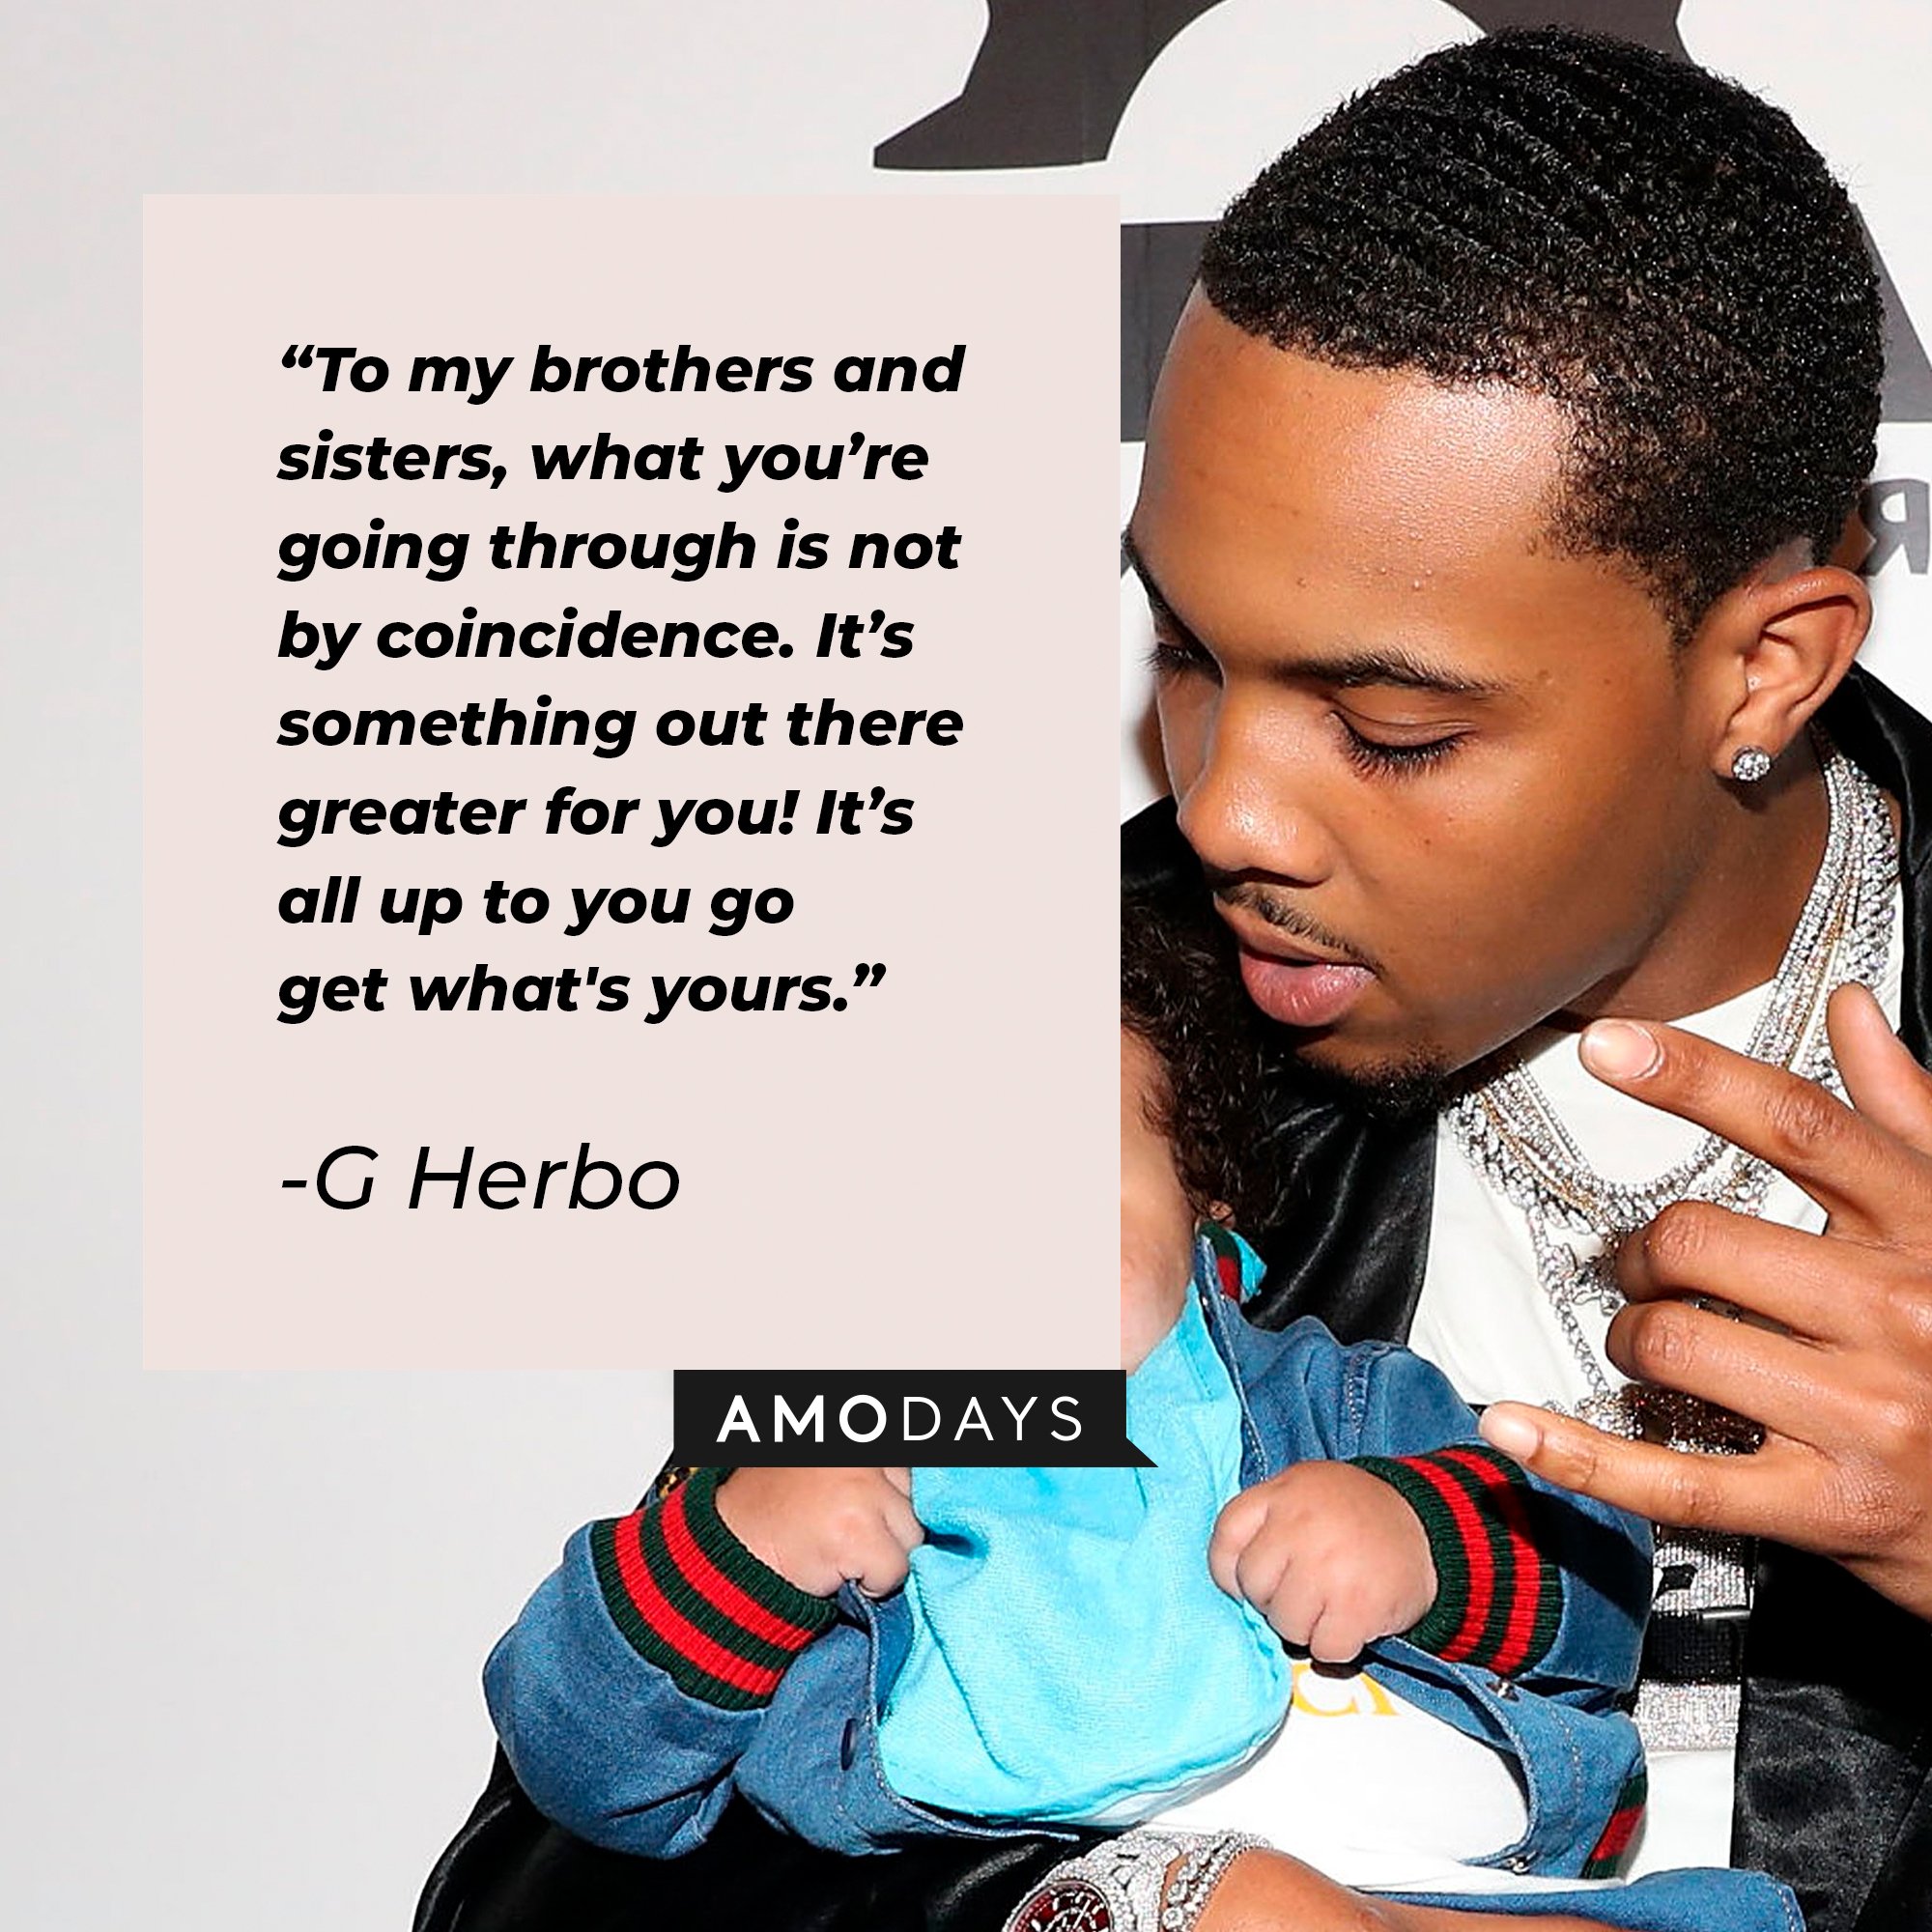 G Herbo’s quote: "To my brothers and sisters, what you’re going through is not by coincidence. It’s something out there greater for you! It's all up to you go get what's yours." | Image: AmoDays 